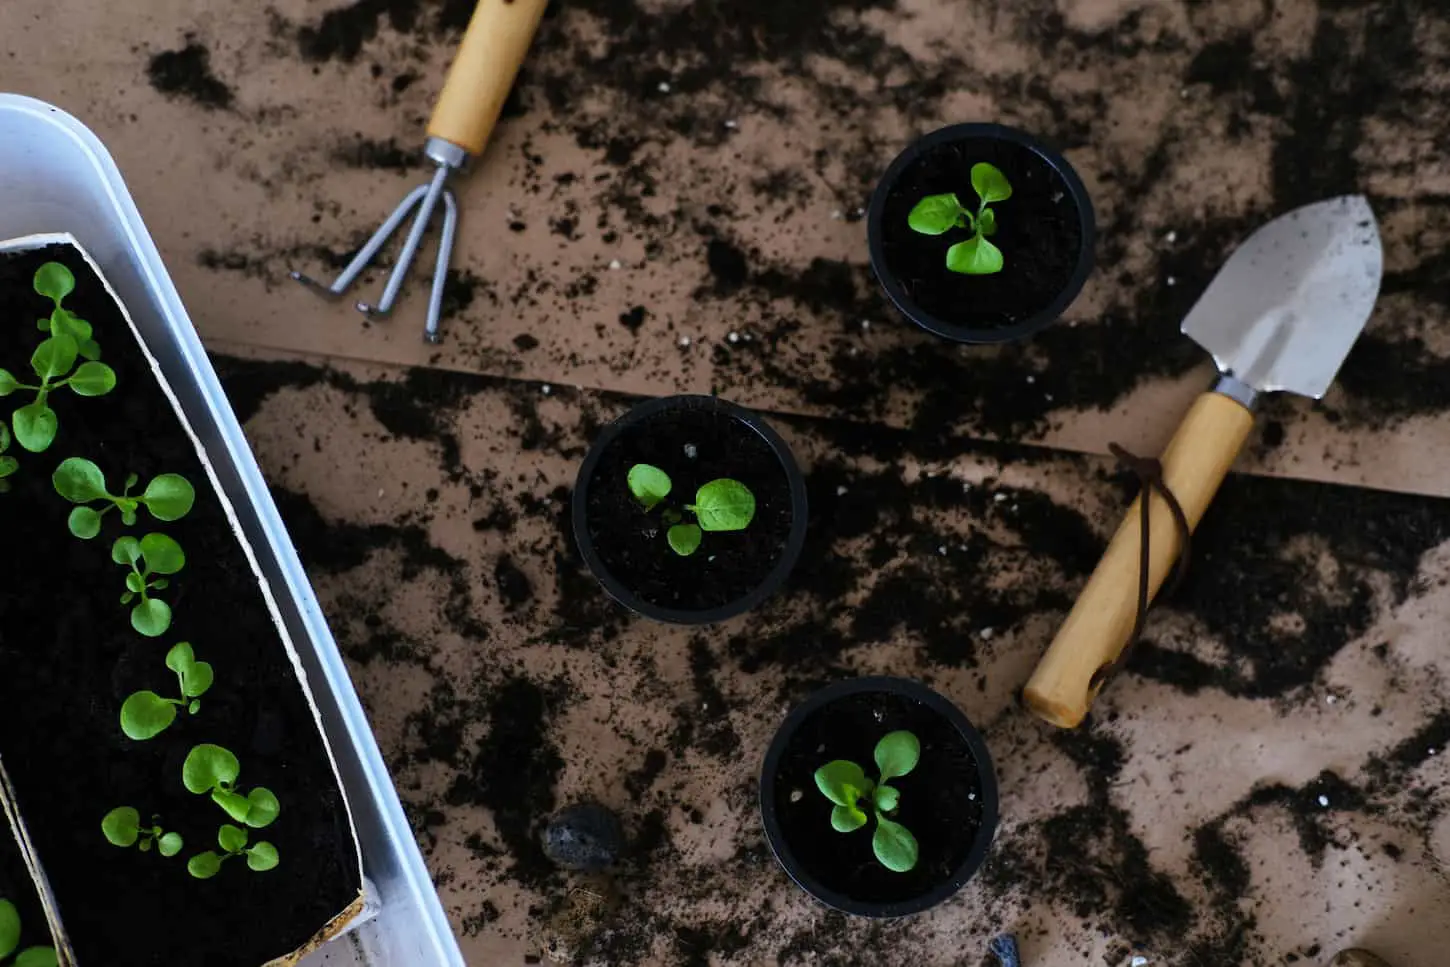 A topview image of young seedlings in a transplanted soil.